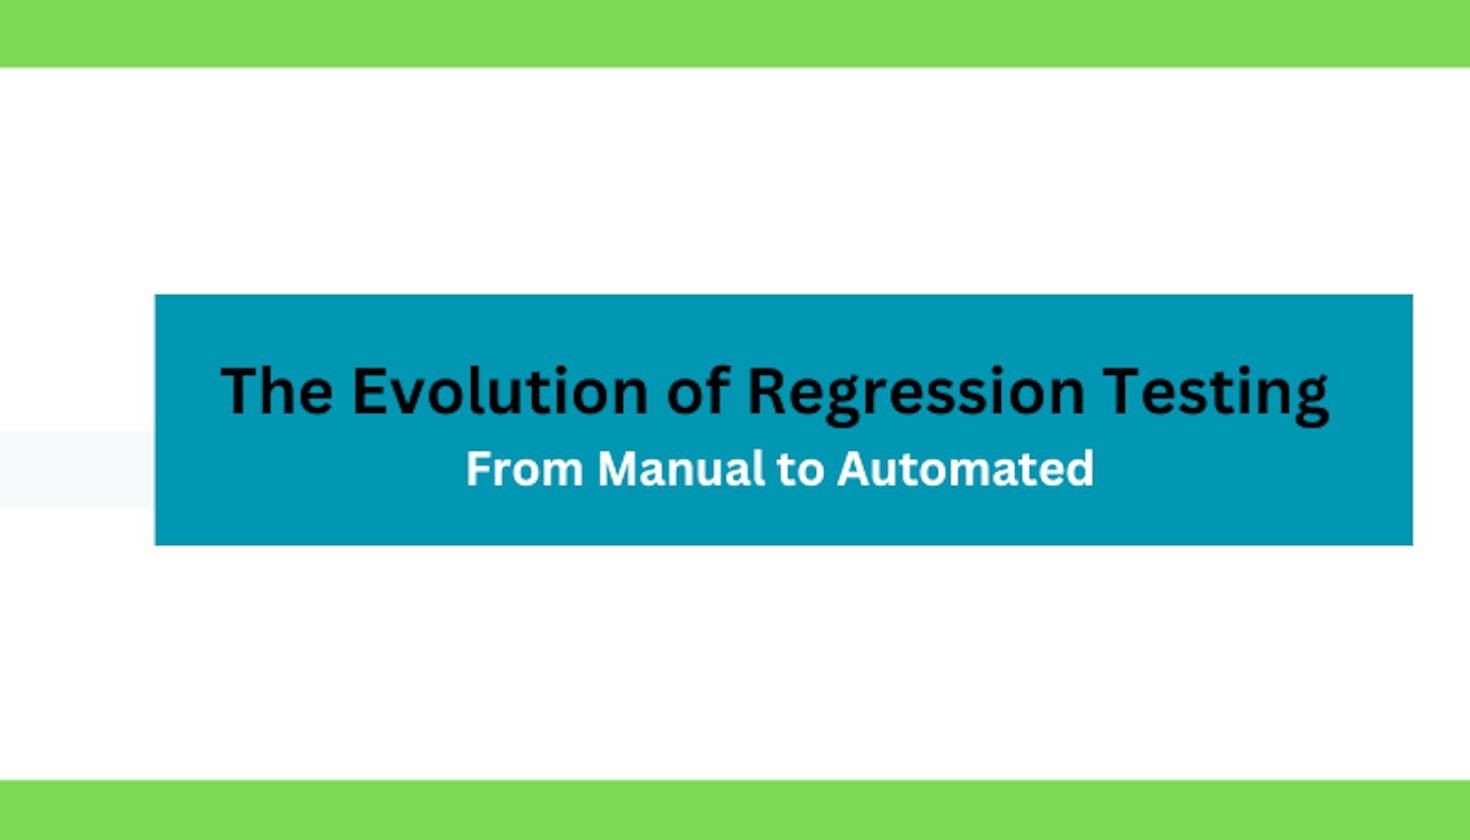 The Evolution of Regression Testing: From Manual to Automated